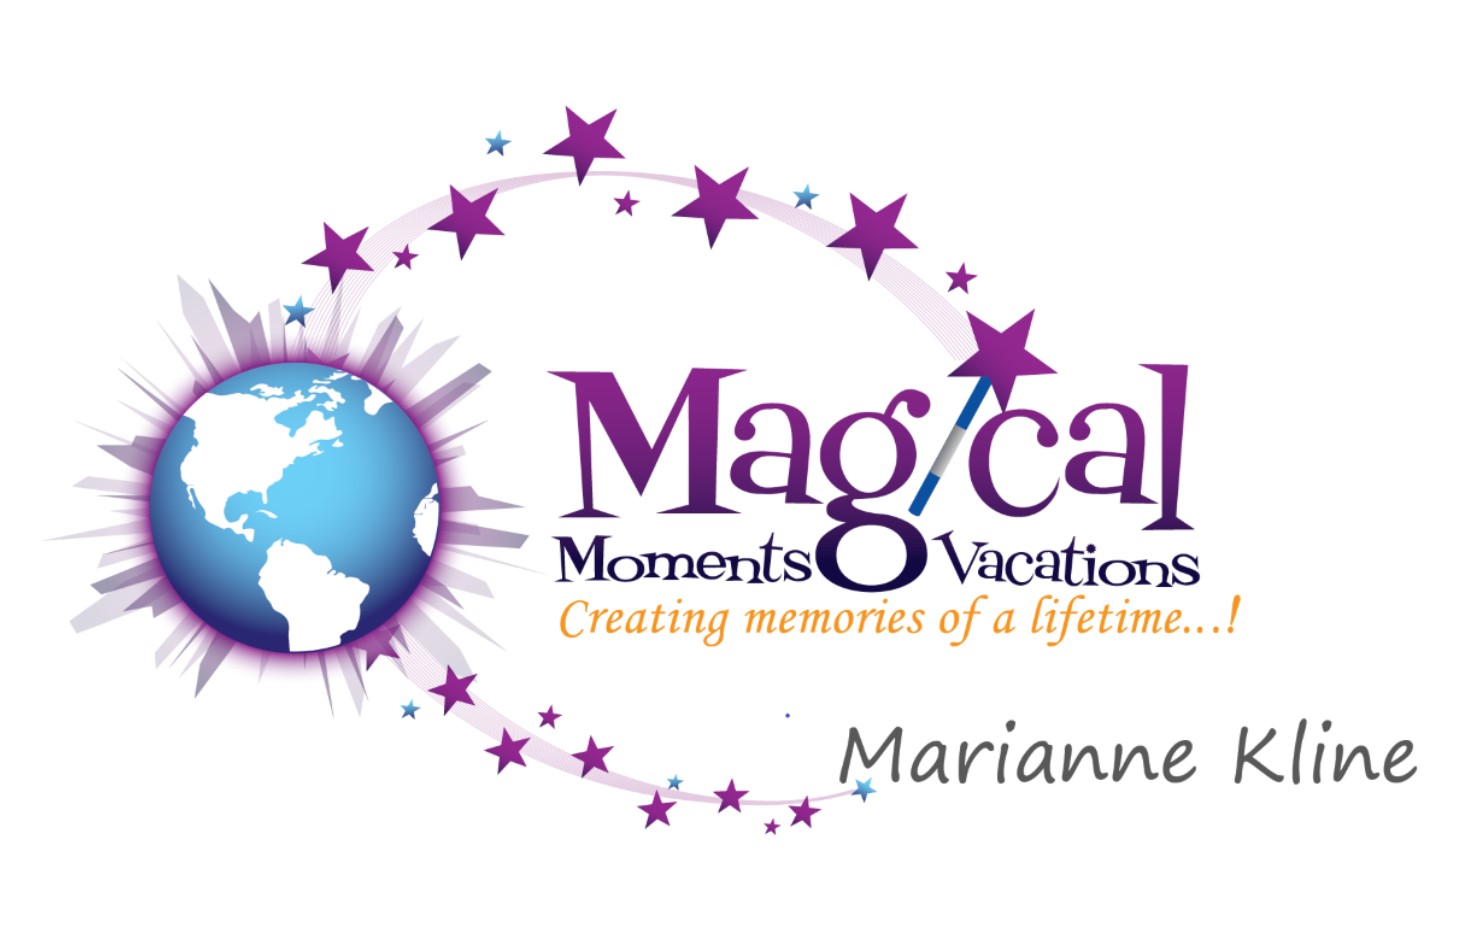 Marianne of Magical Moments Vacations